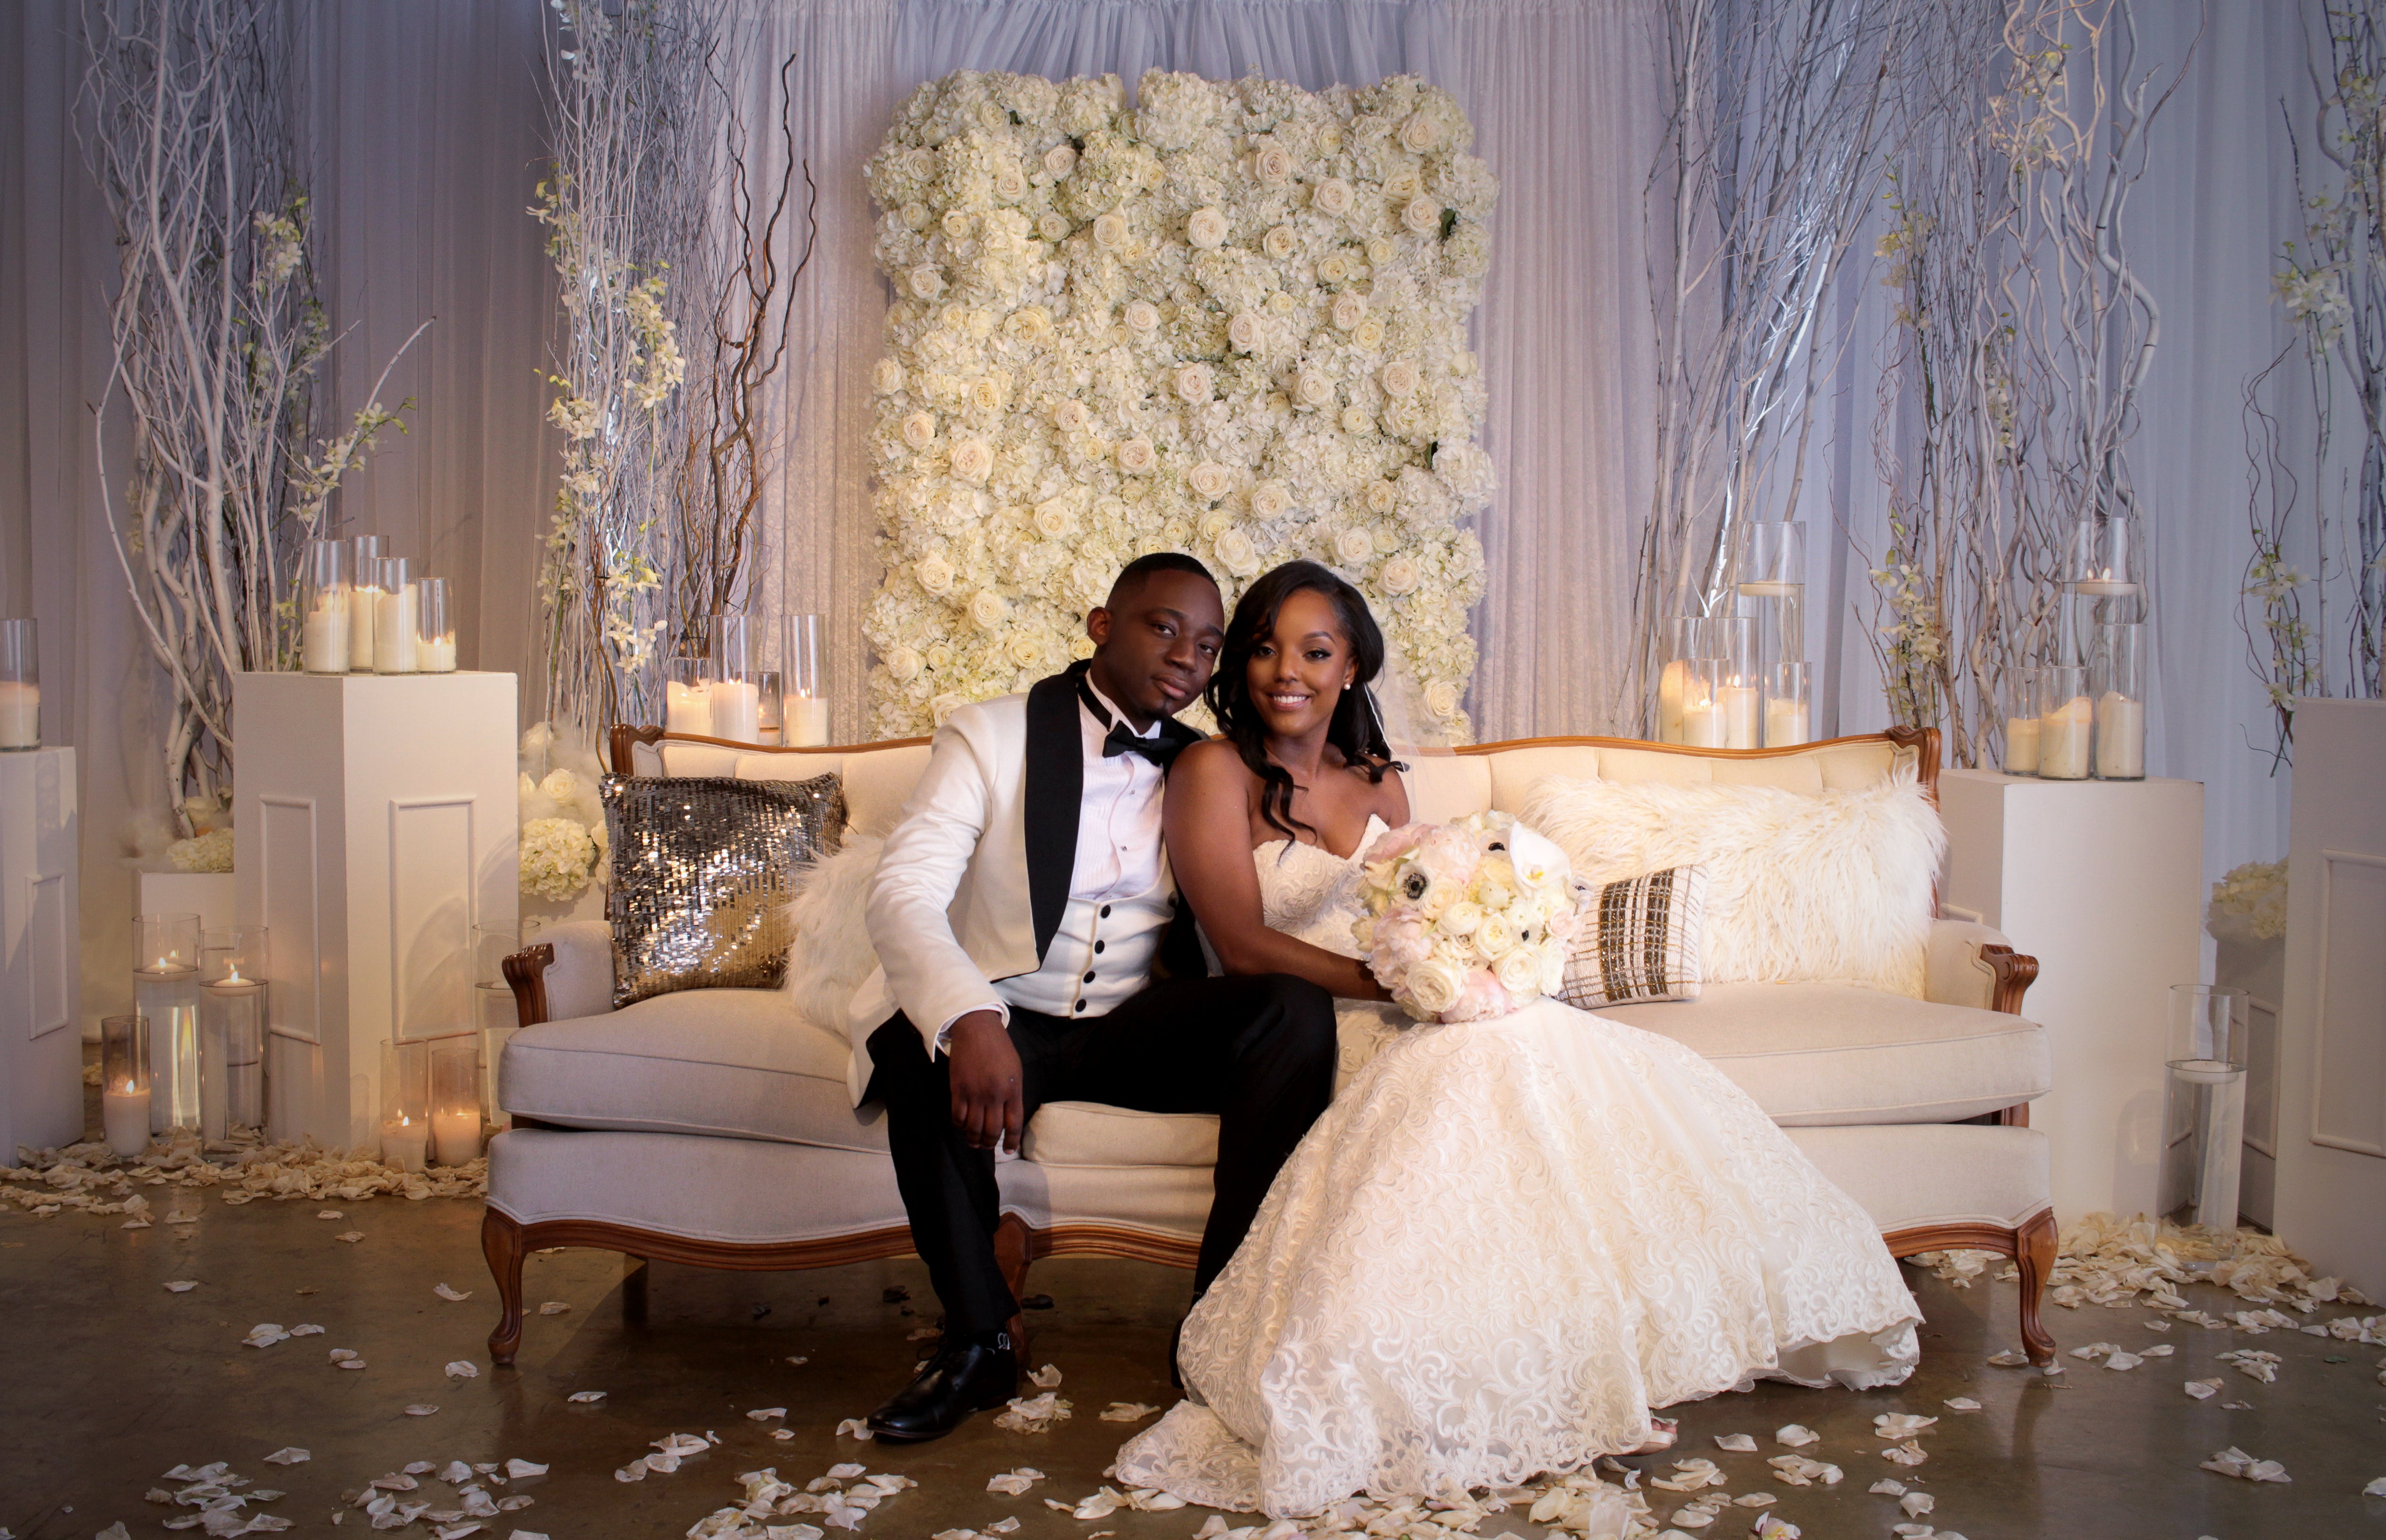 Bridal Bliss: High School Sweetheart's Ridge And Tamela's All-White Wedding Was Where Classic Meets Chic
